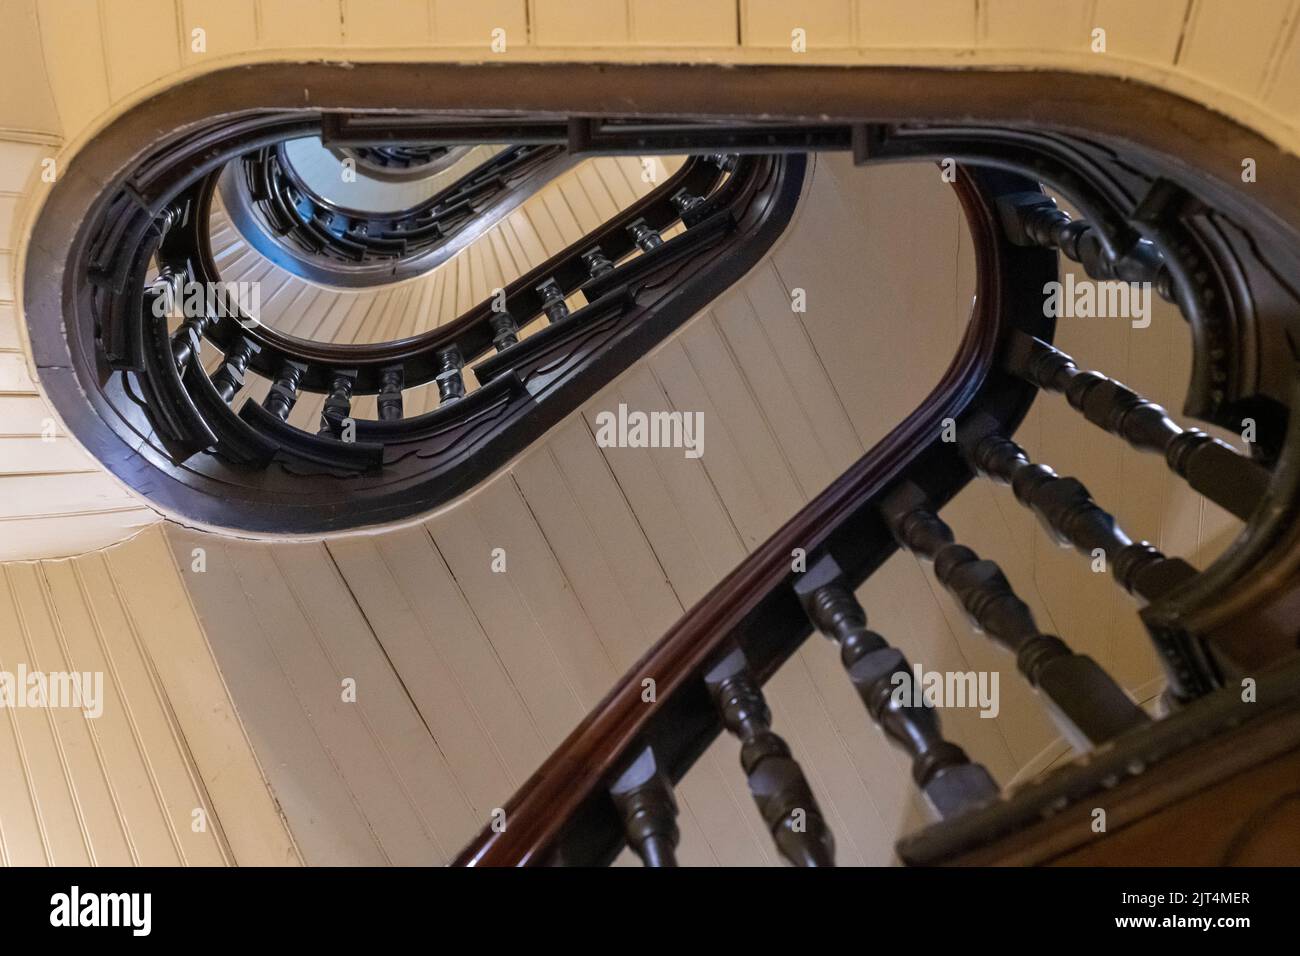 Staircase inside The Block, a historic shopping arcade in Melbourne's CBD. Stock Photo